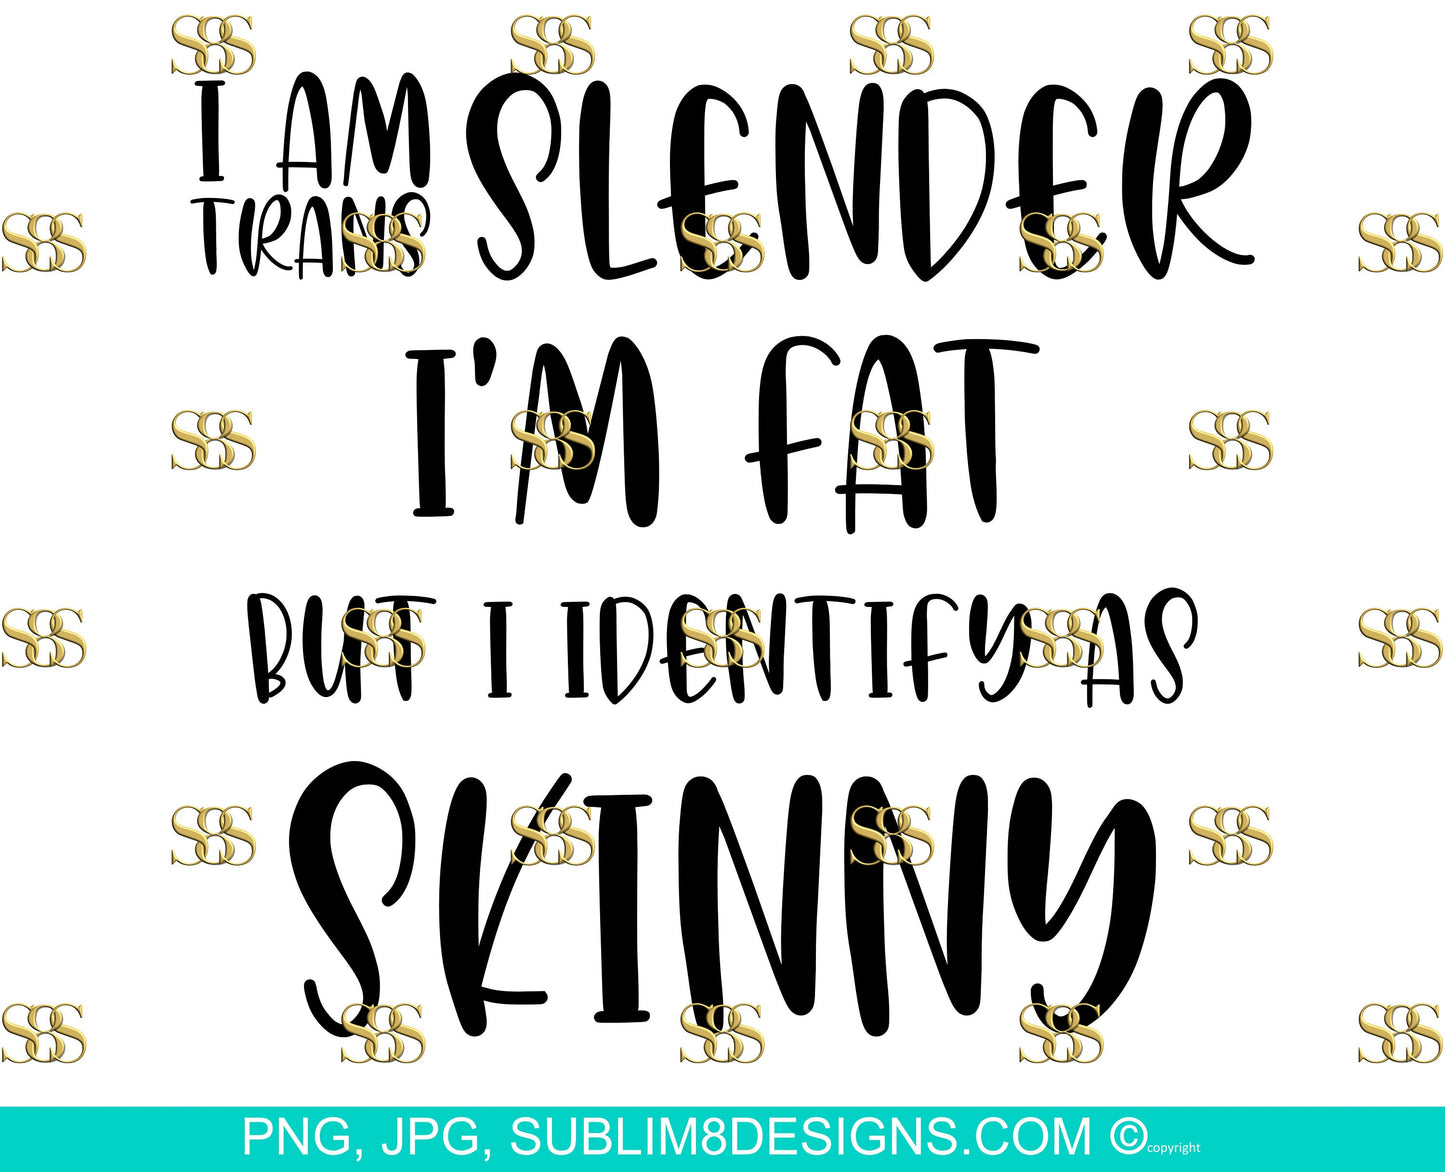 I Am Trans Slender I 'm Fat But I Identify As Skinny Sublimation Design and Cutting Machines SVG, PNG and JPG